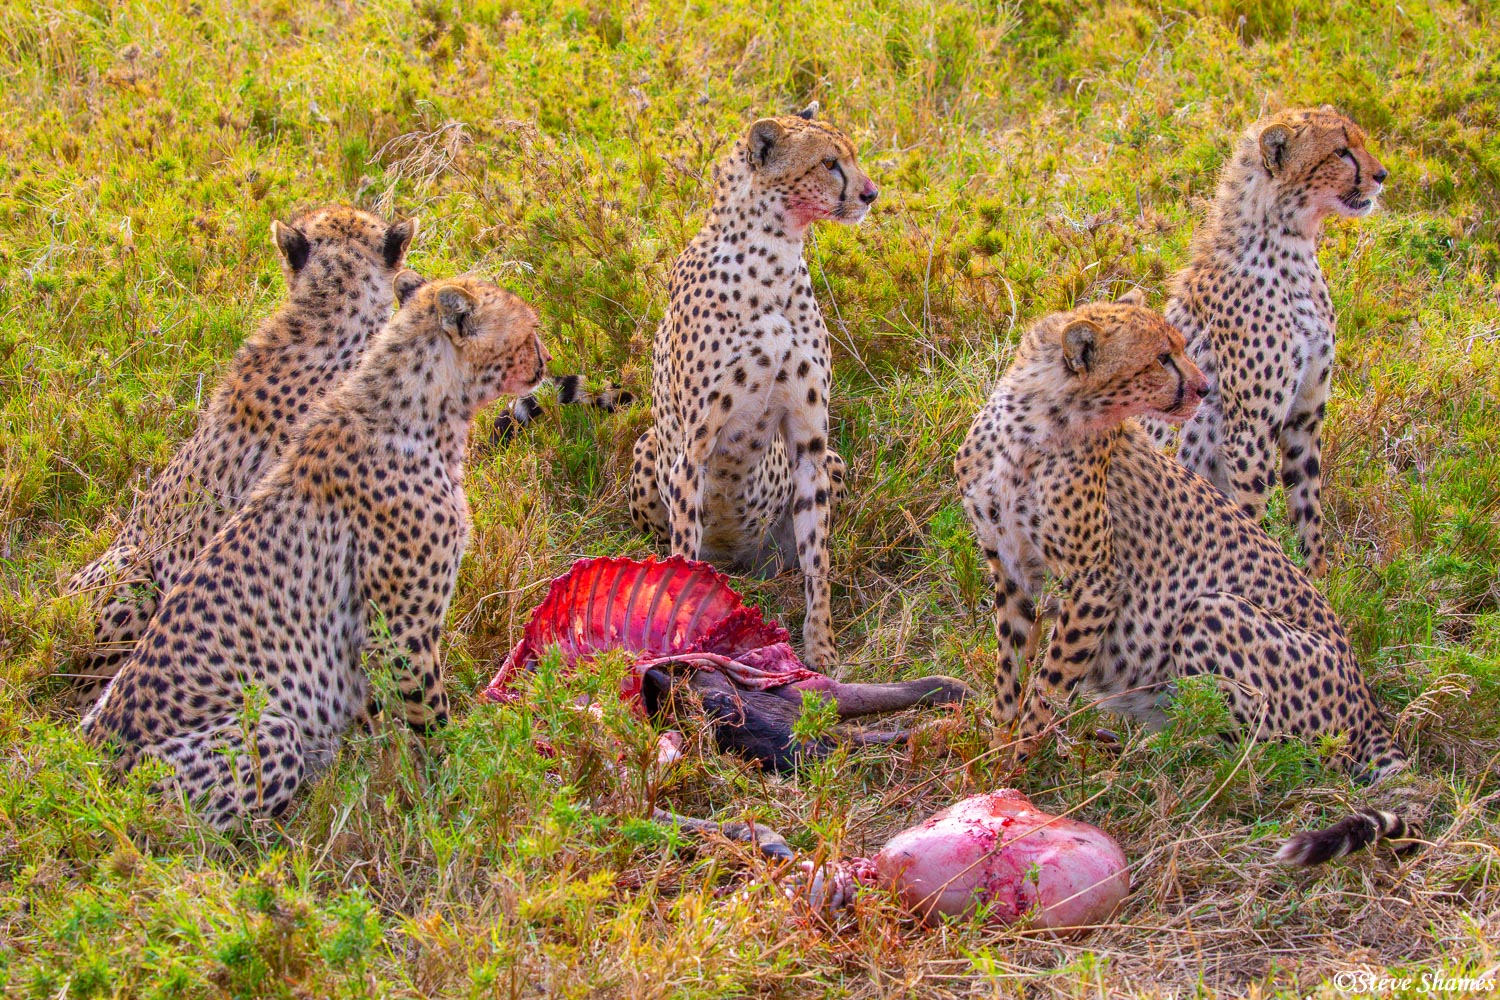 Cheetahs eating. Looks like they have had their fill of this wildebeest.